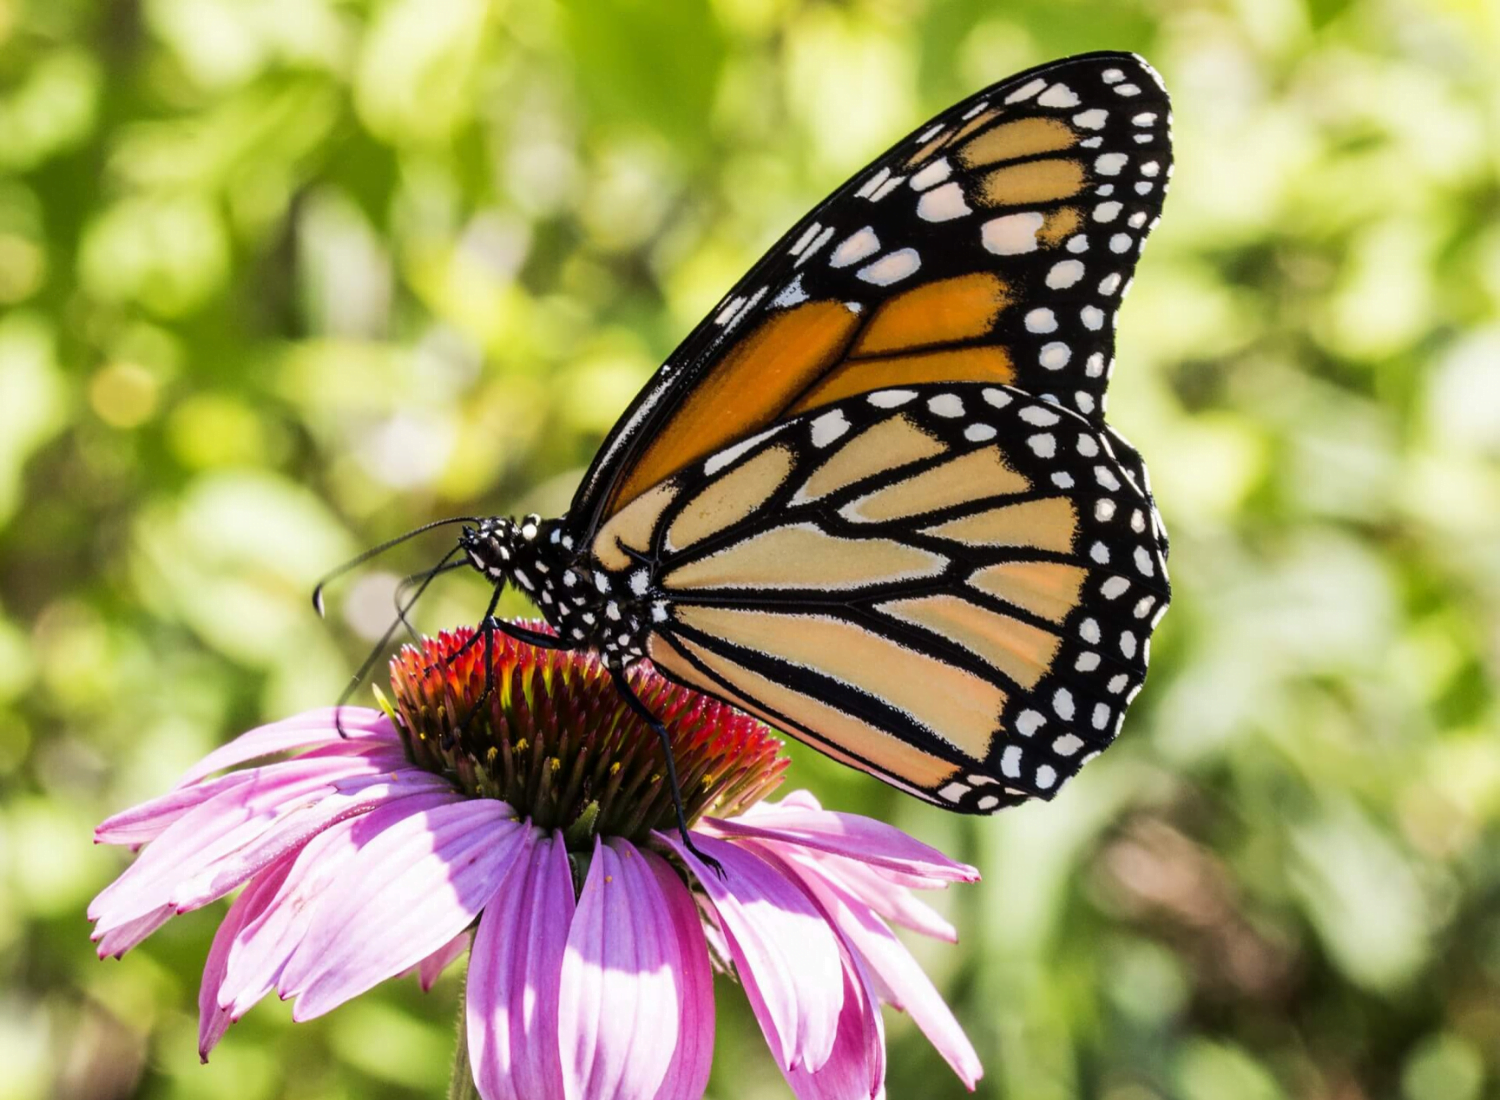 How Do Butterfly Wings Get Their Magnificent Color?